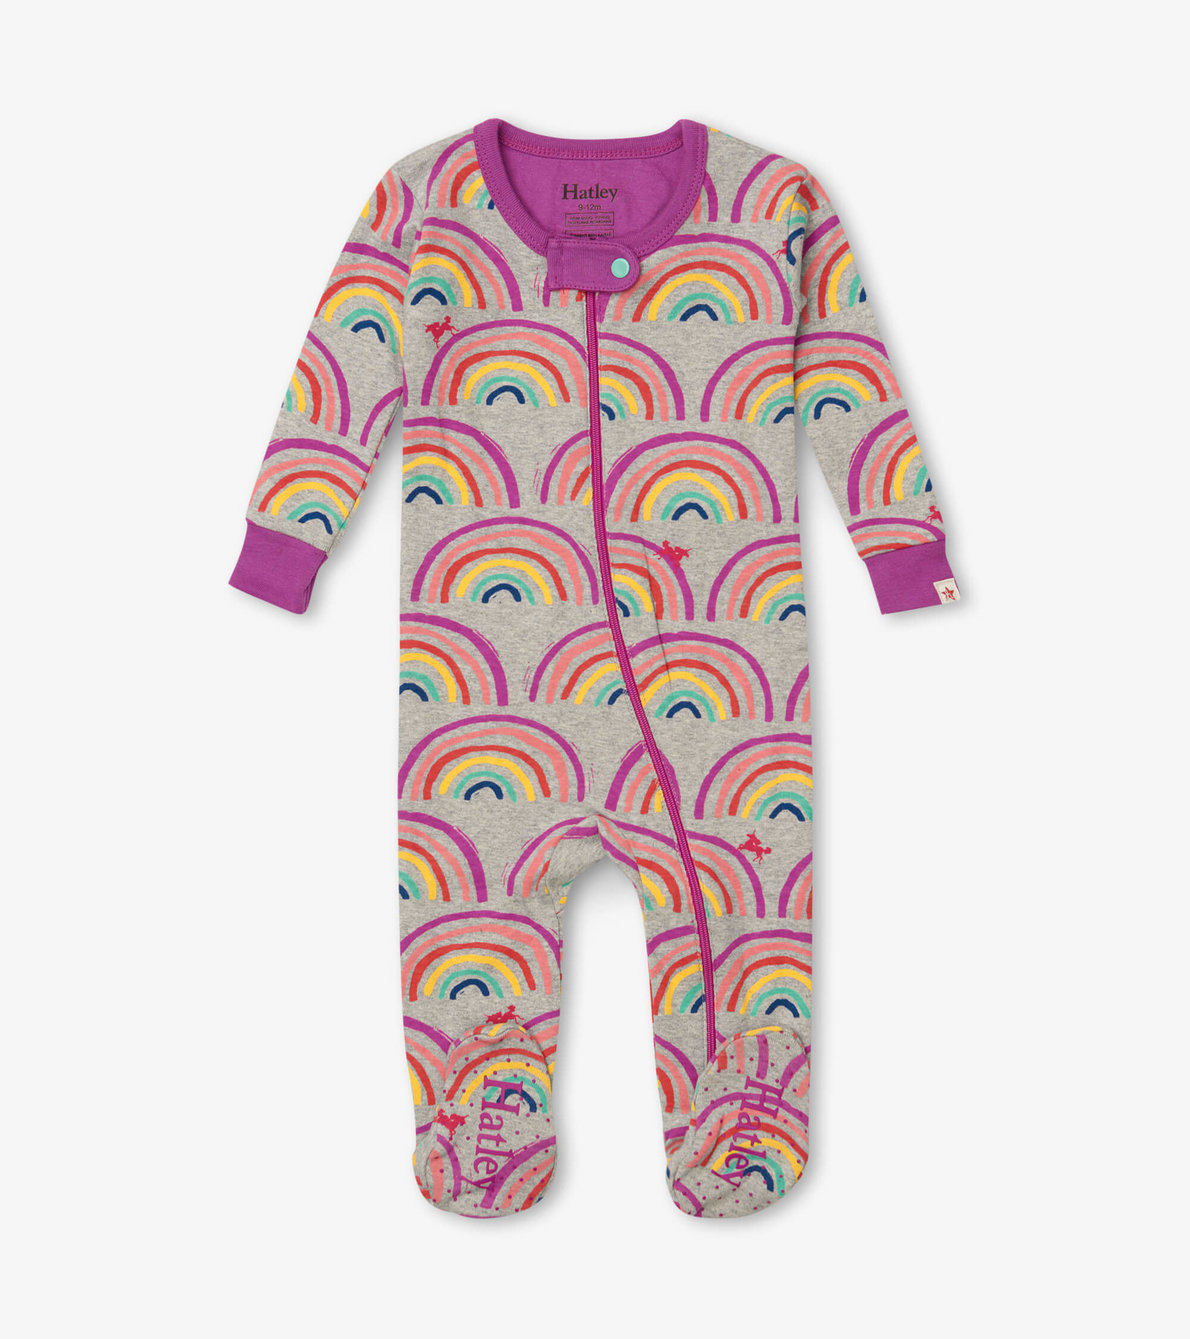 View larger image of Rainbow Dreams Organic Cotton Baby Footed Sleeper